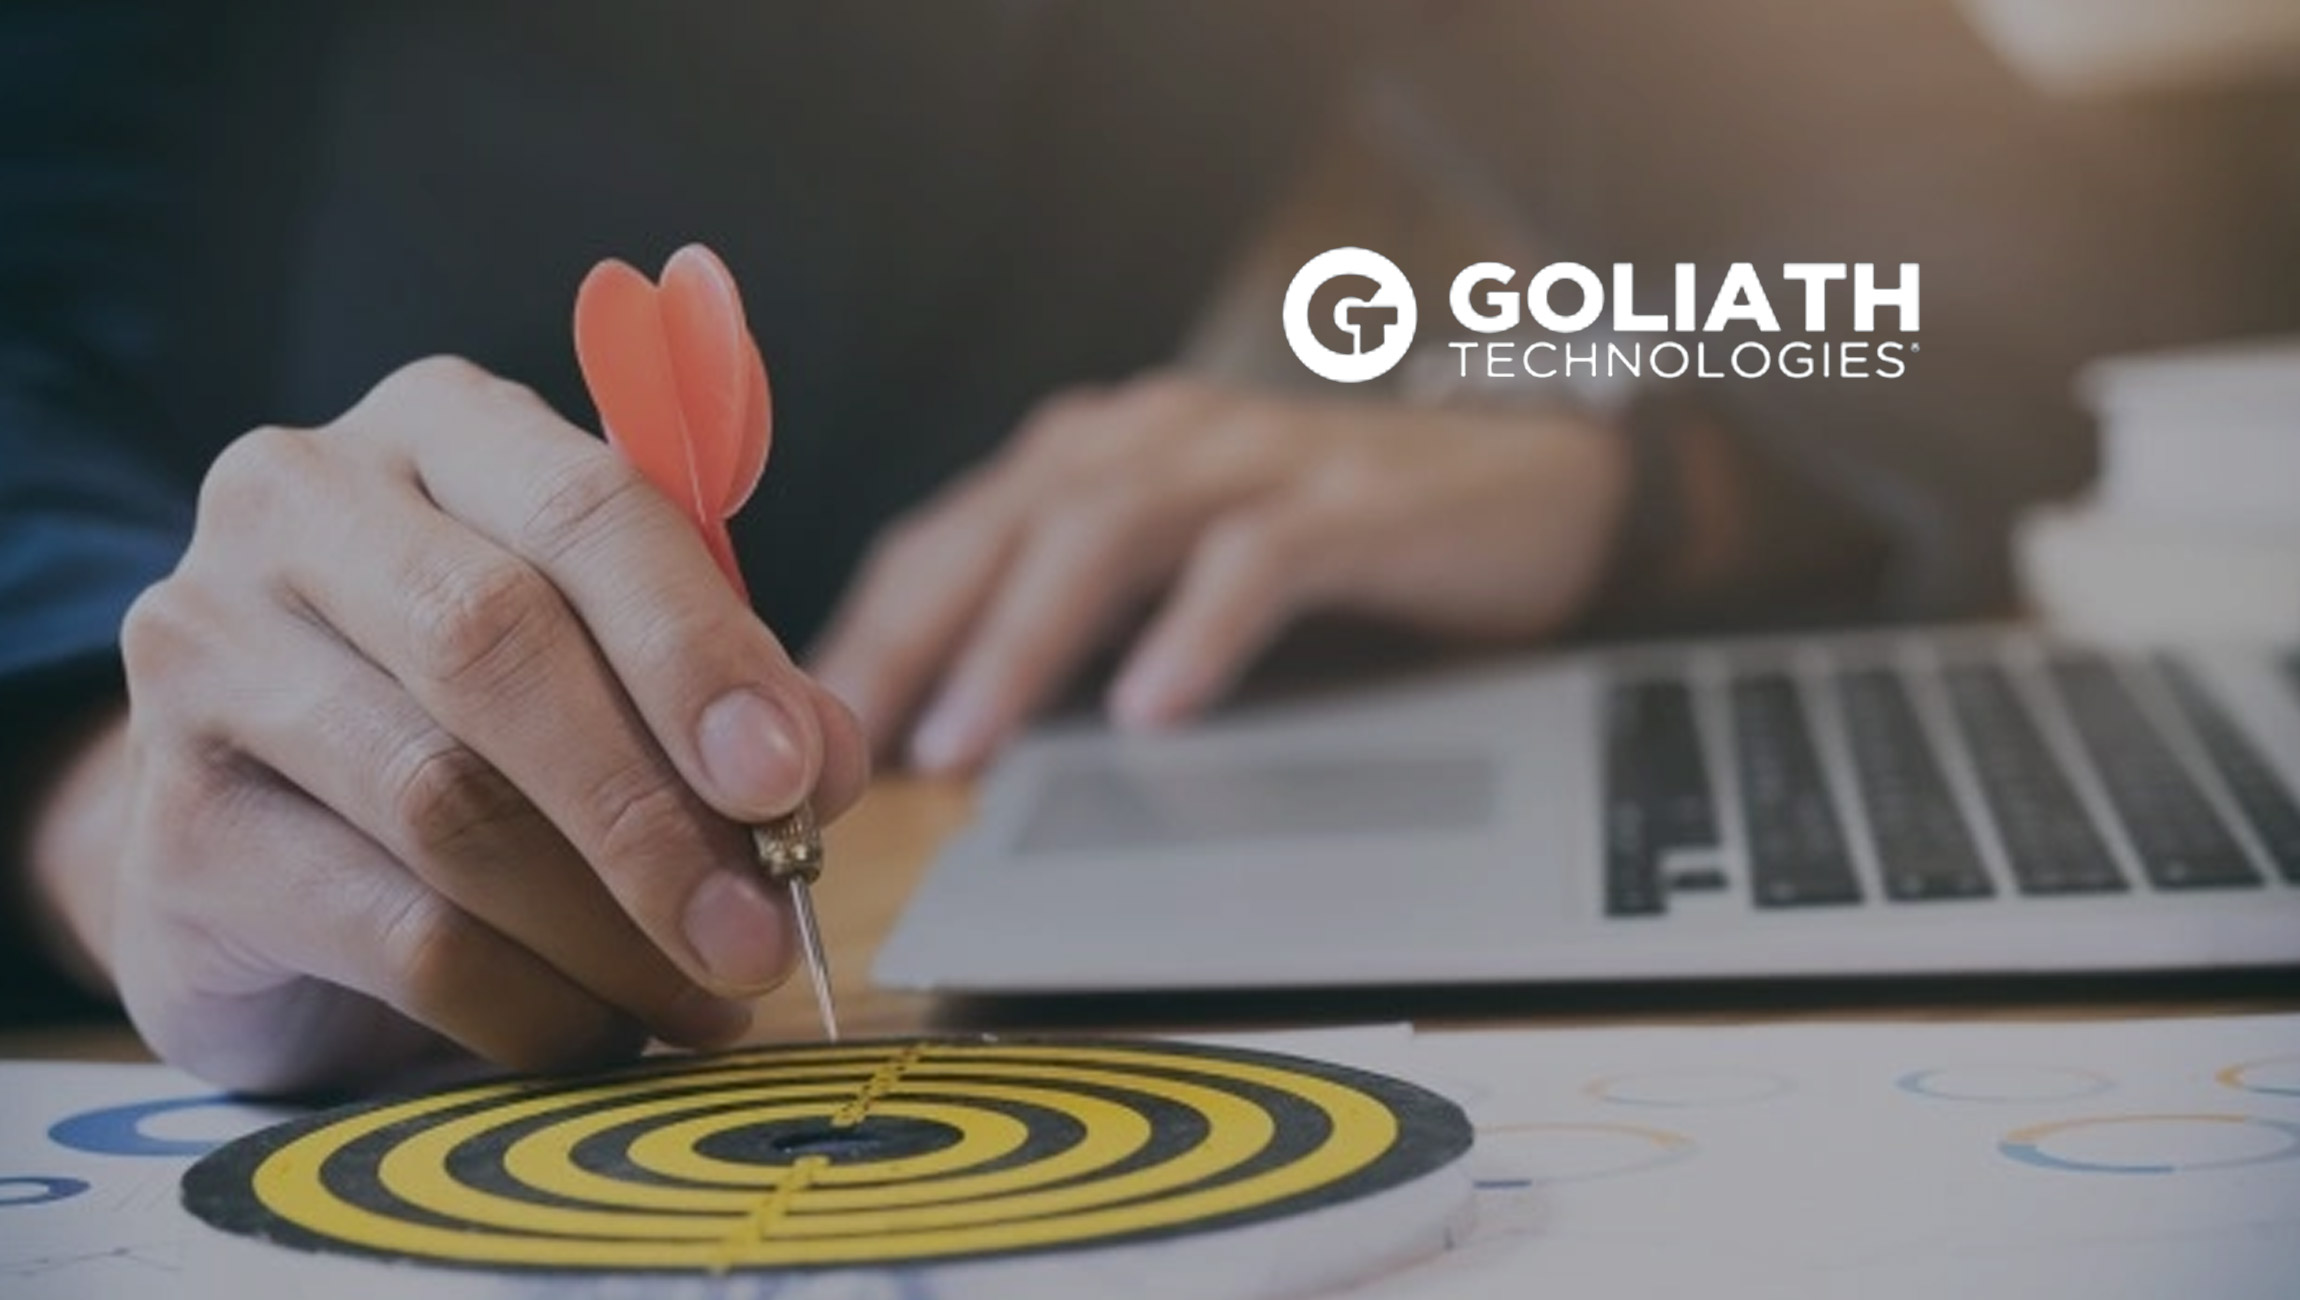 Goliath Technologies Achieves Another Record Year in 2021